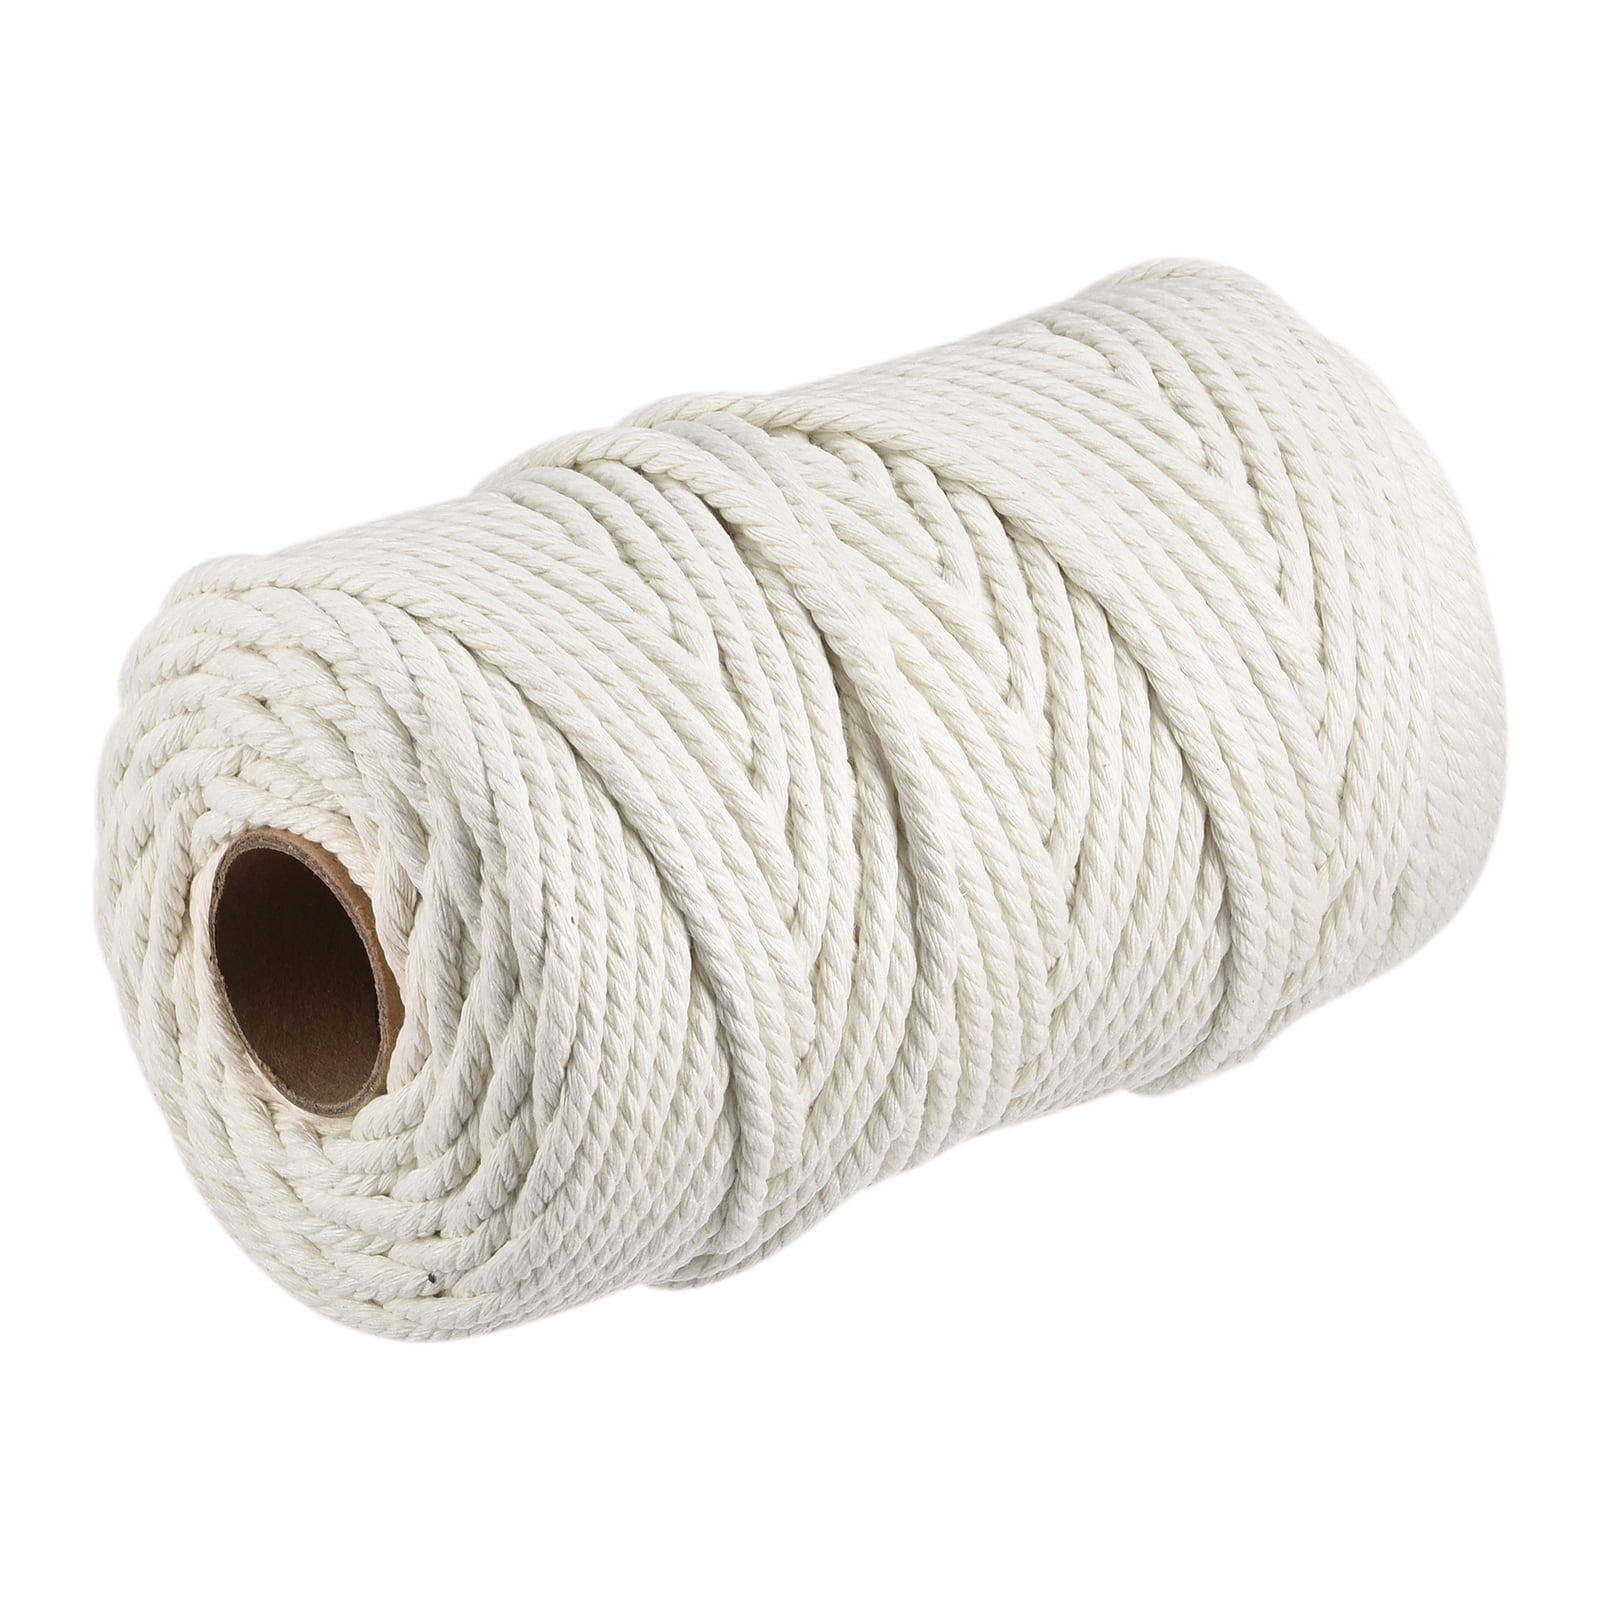 Uxcell Cotton Rope 3 Strand Twisted Braided Rope Cord, Milky White